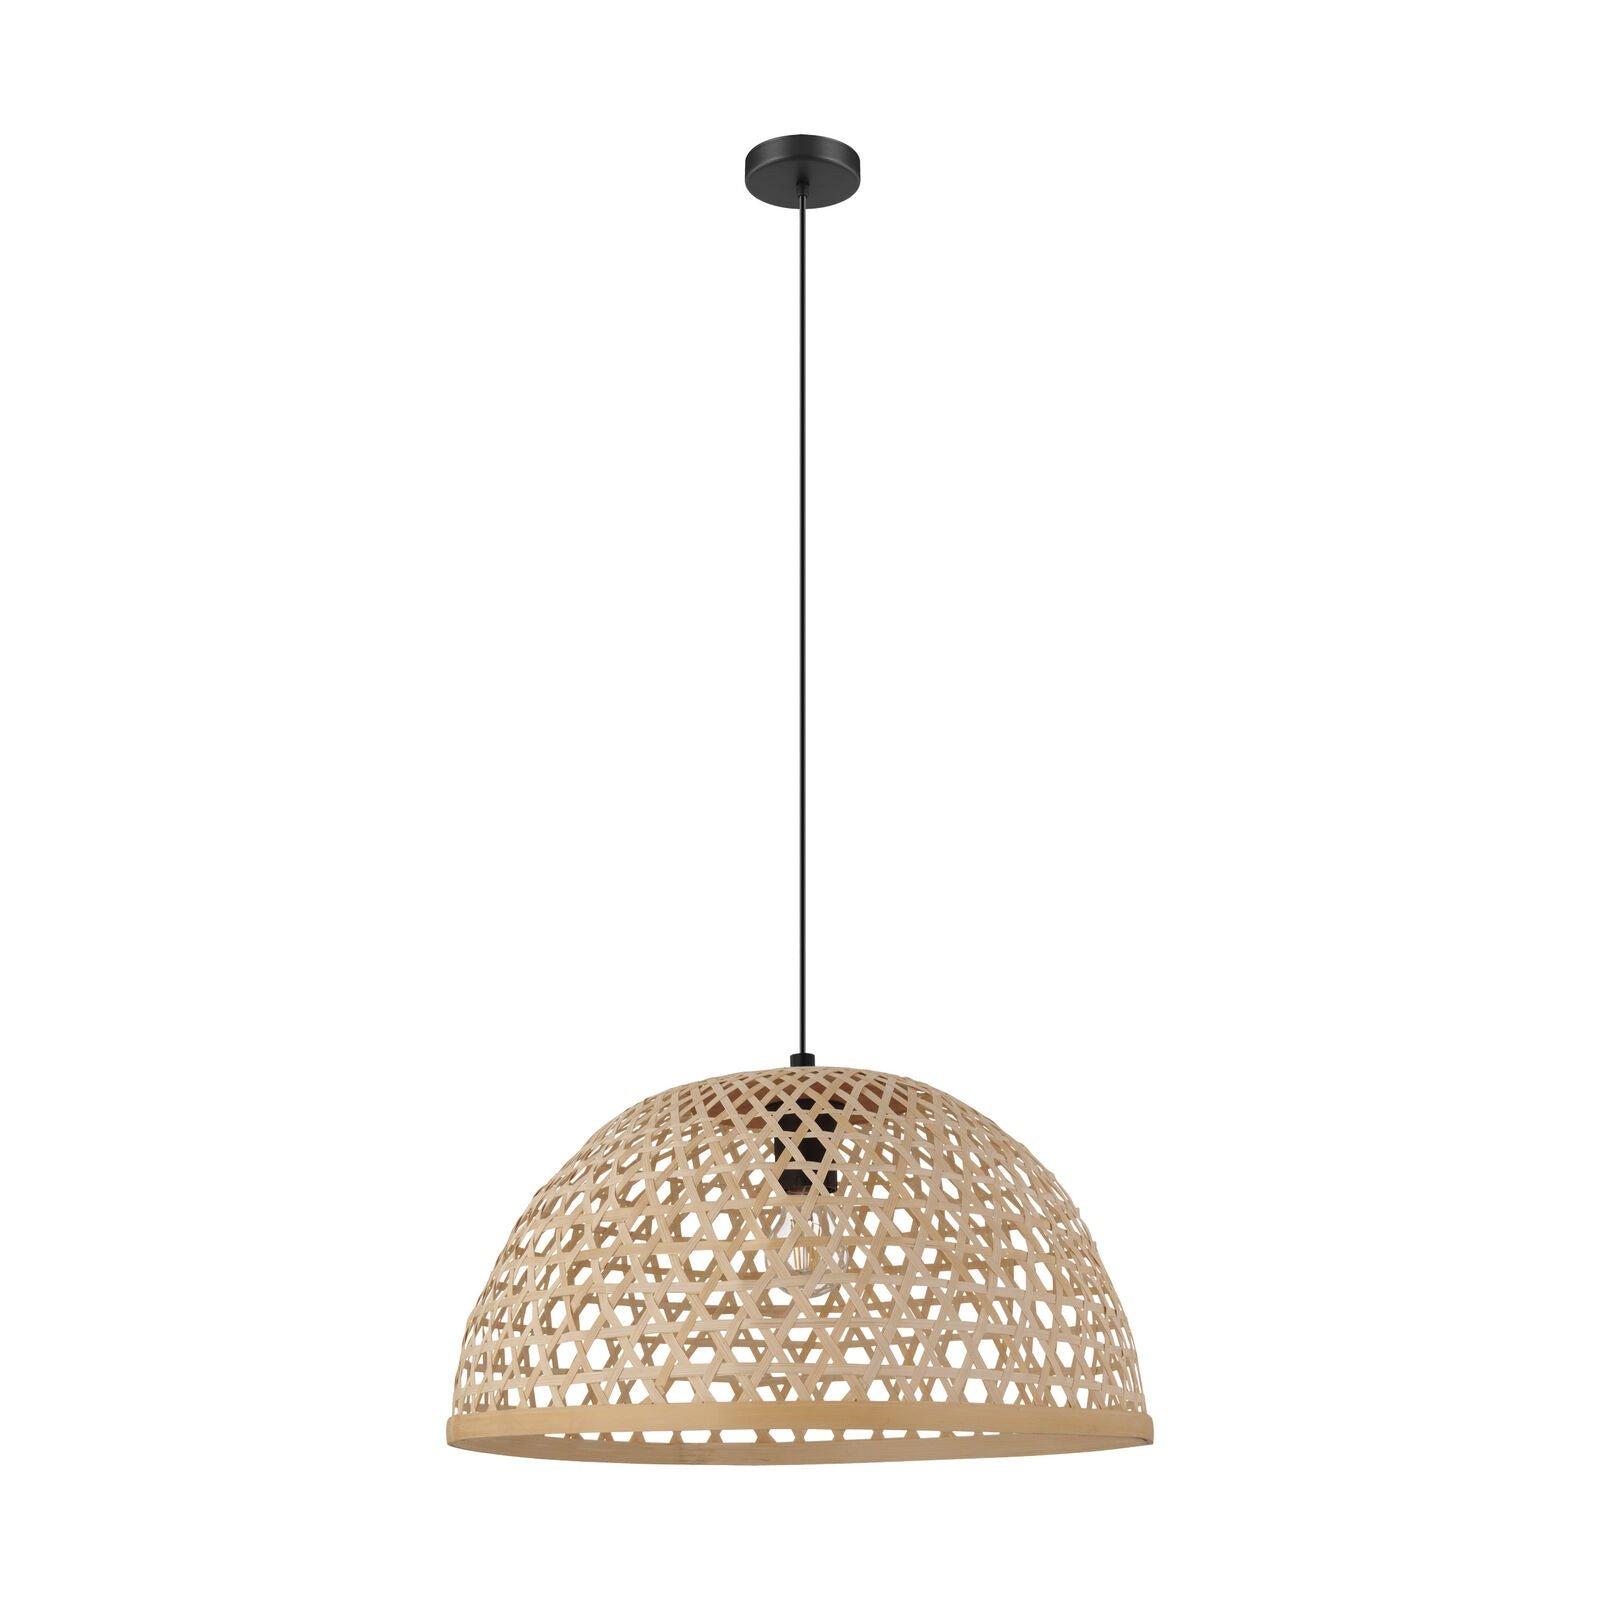 Hanging Ceiling Pendant Light Wicker Shade 1 x 40W E27 Hallway Feature Lamp